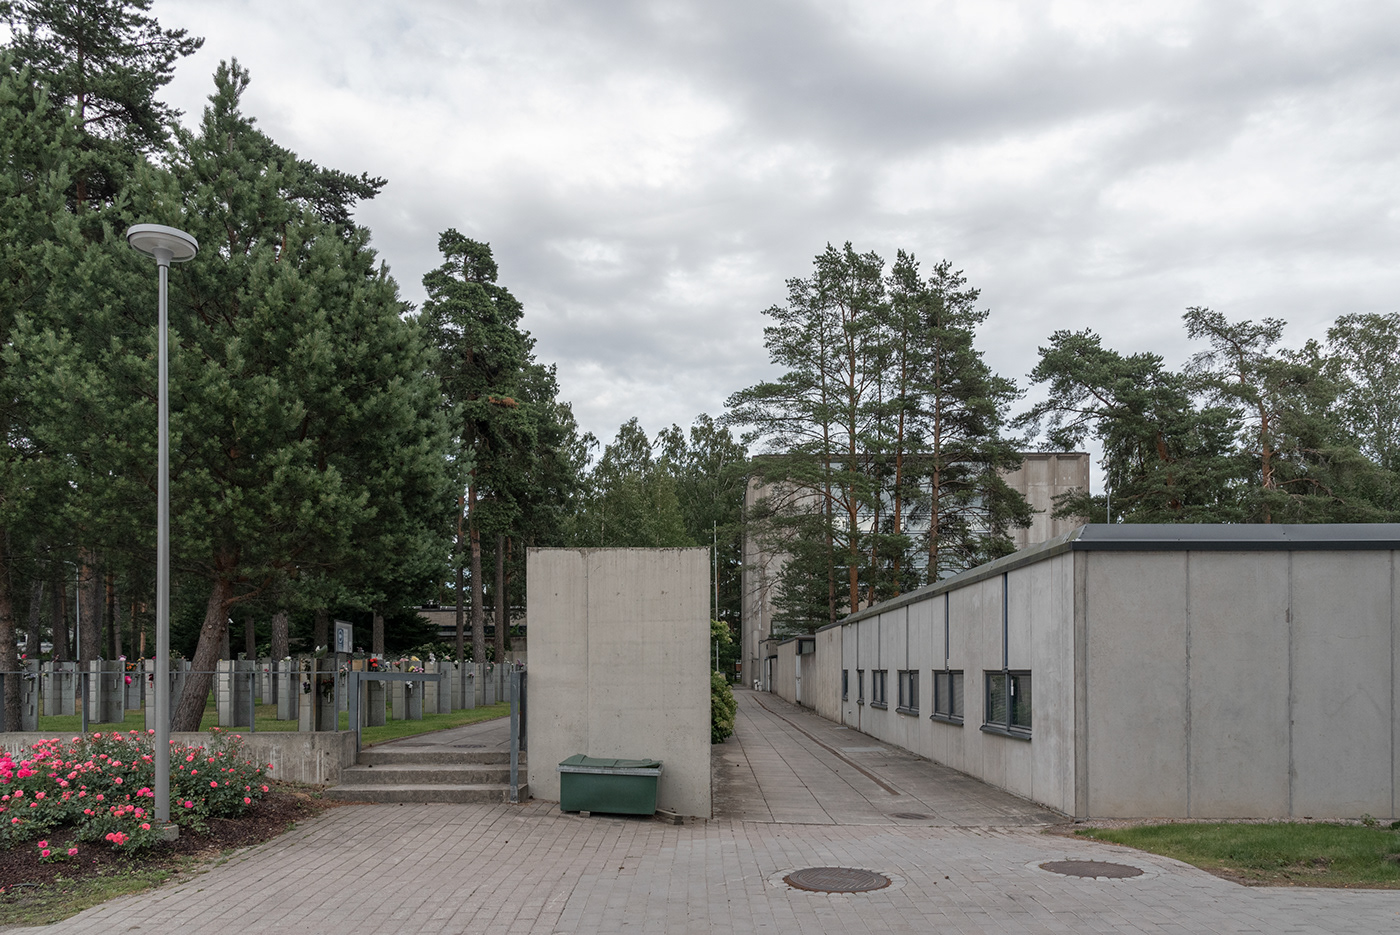 ArchDaily architectural architectural photography architecture beton Brutalism concrete finland modernism Tapiola